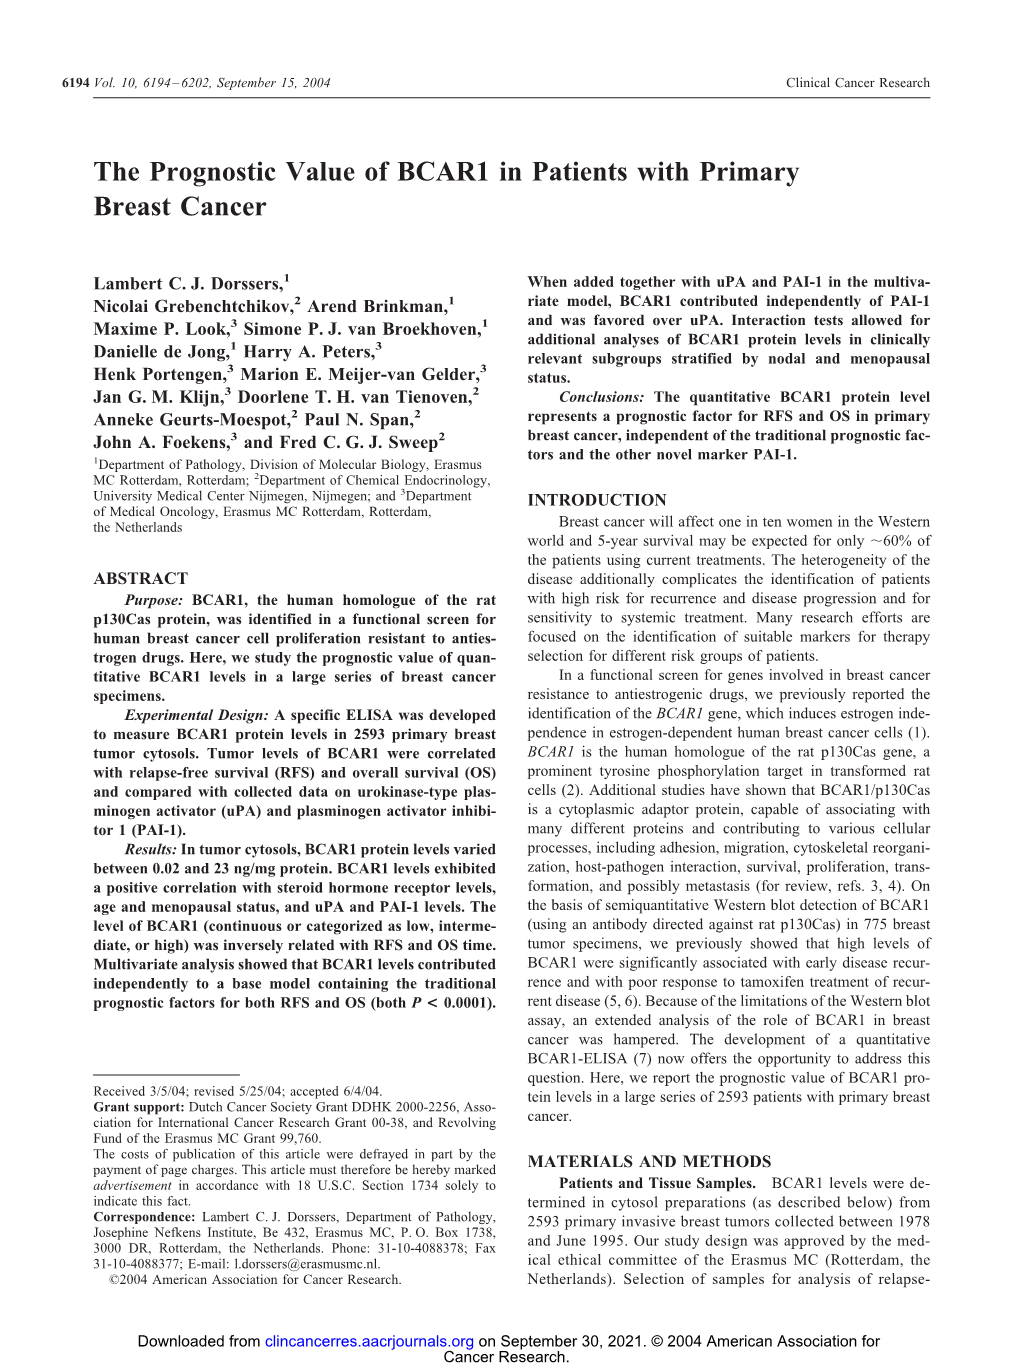 The Prognostic Value of BCAR1 in Patients with Primary Breast Cancer